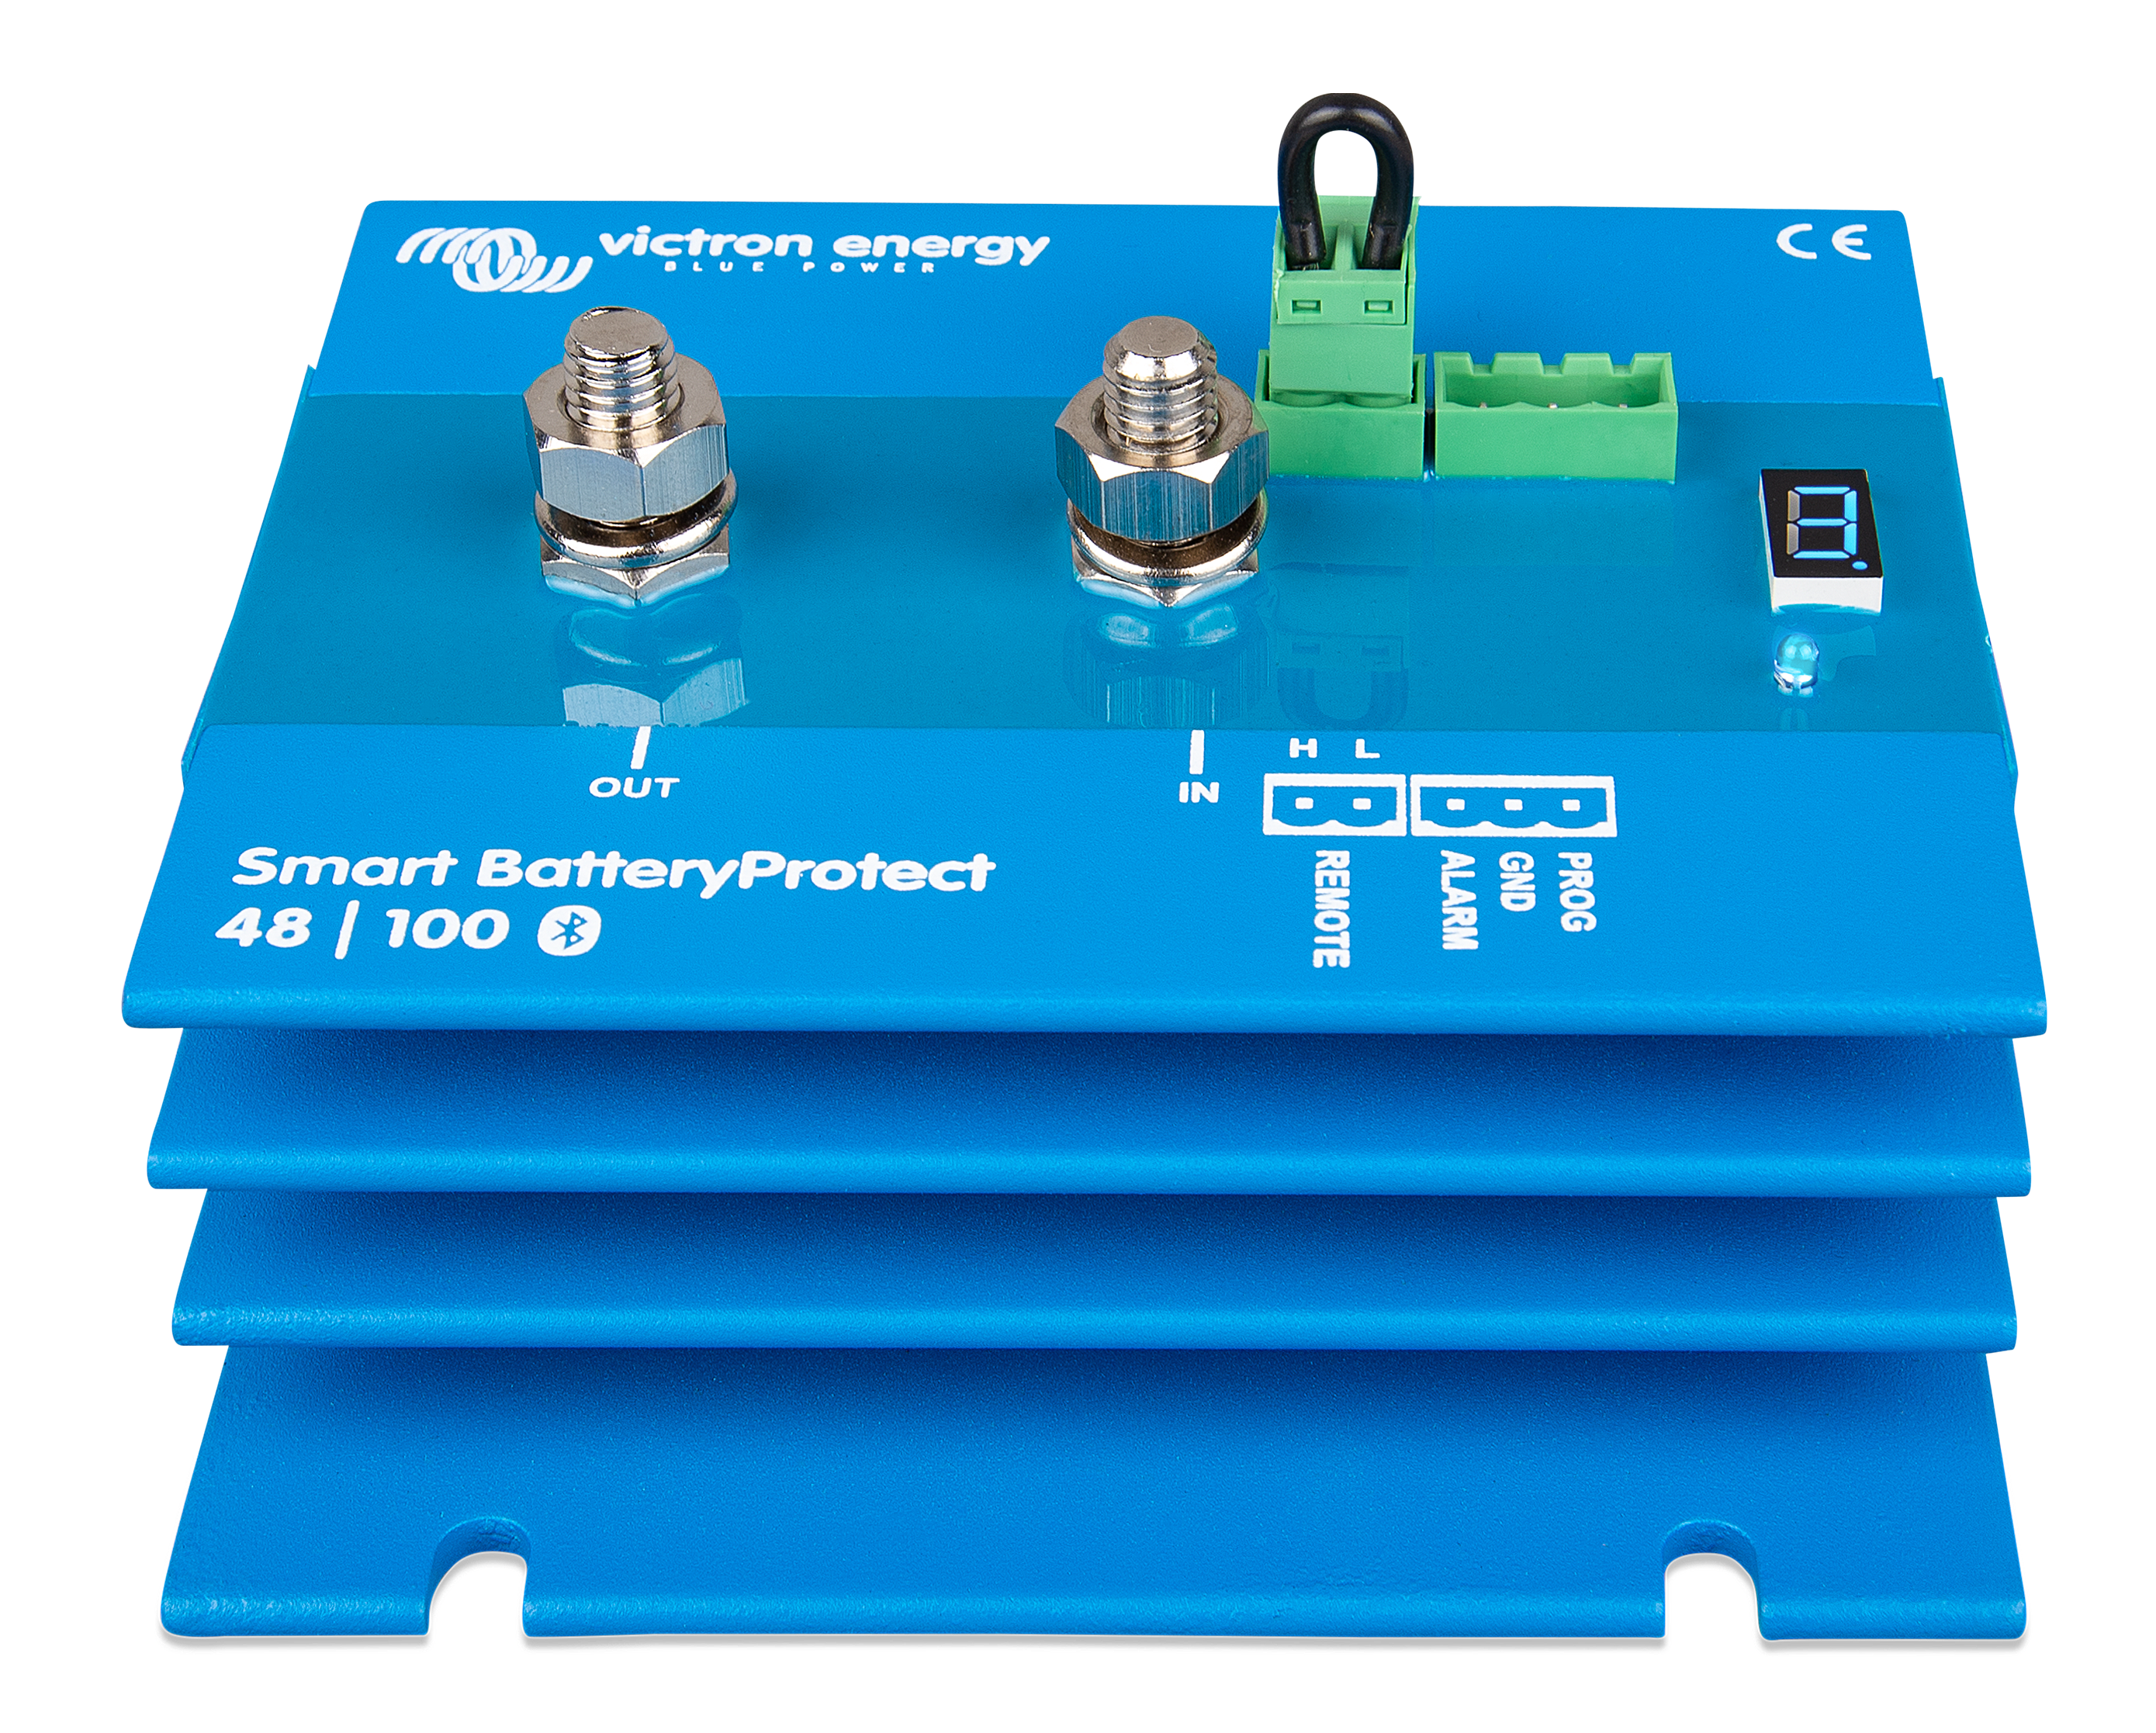 Smart BatteryProtect - Victron Energy